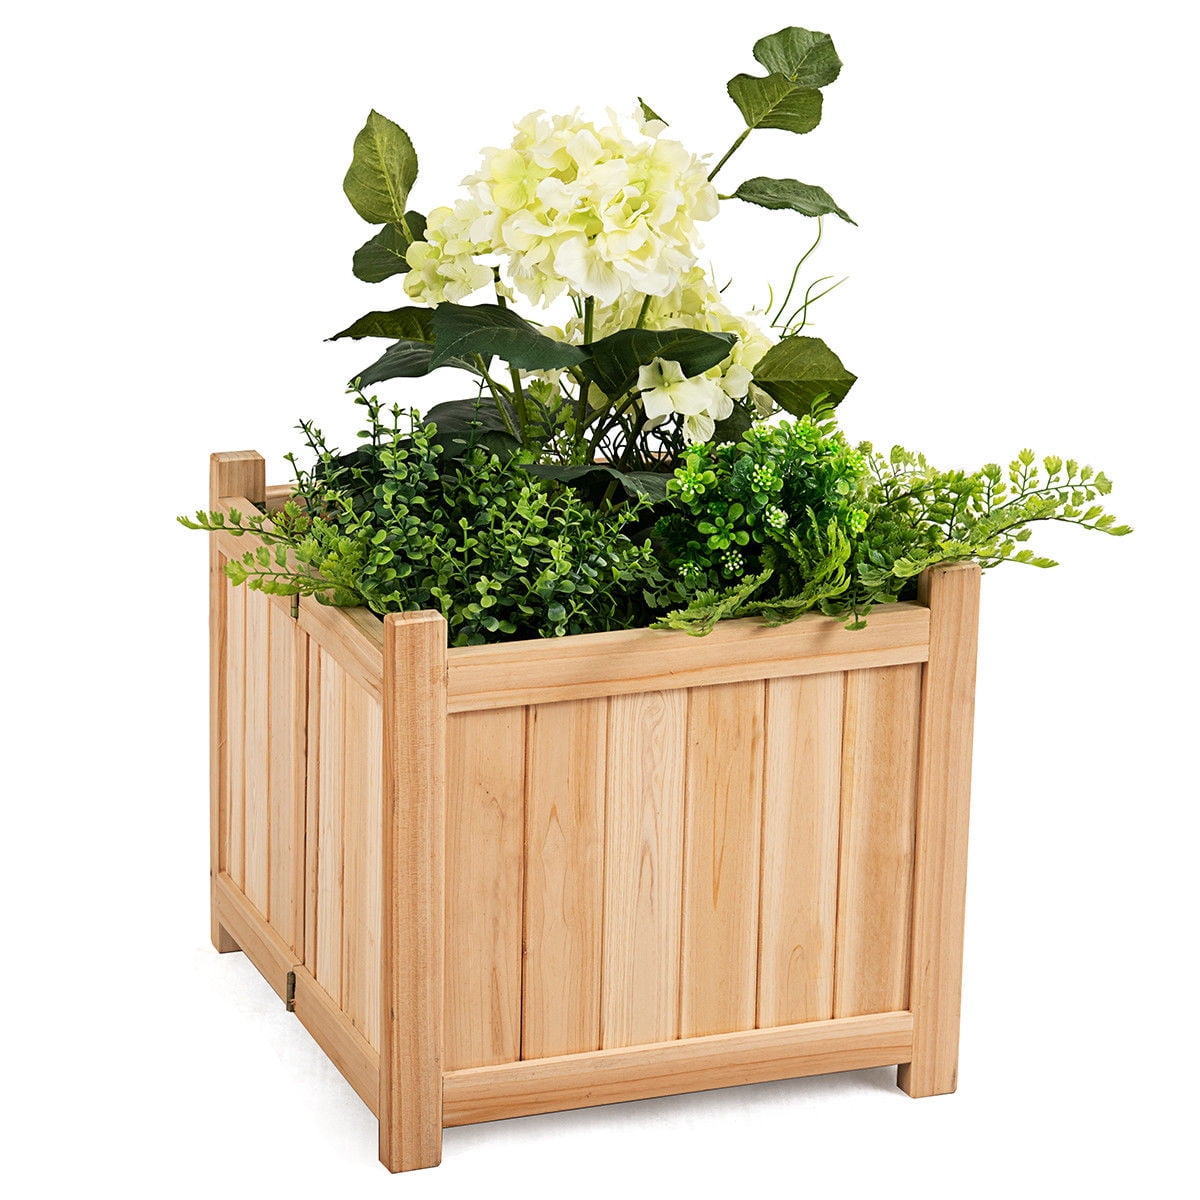 Plant Pot Holder Planter Container Box, Wooden Containers For Flowers